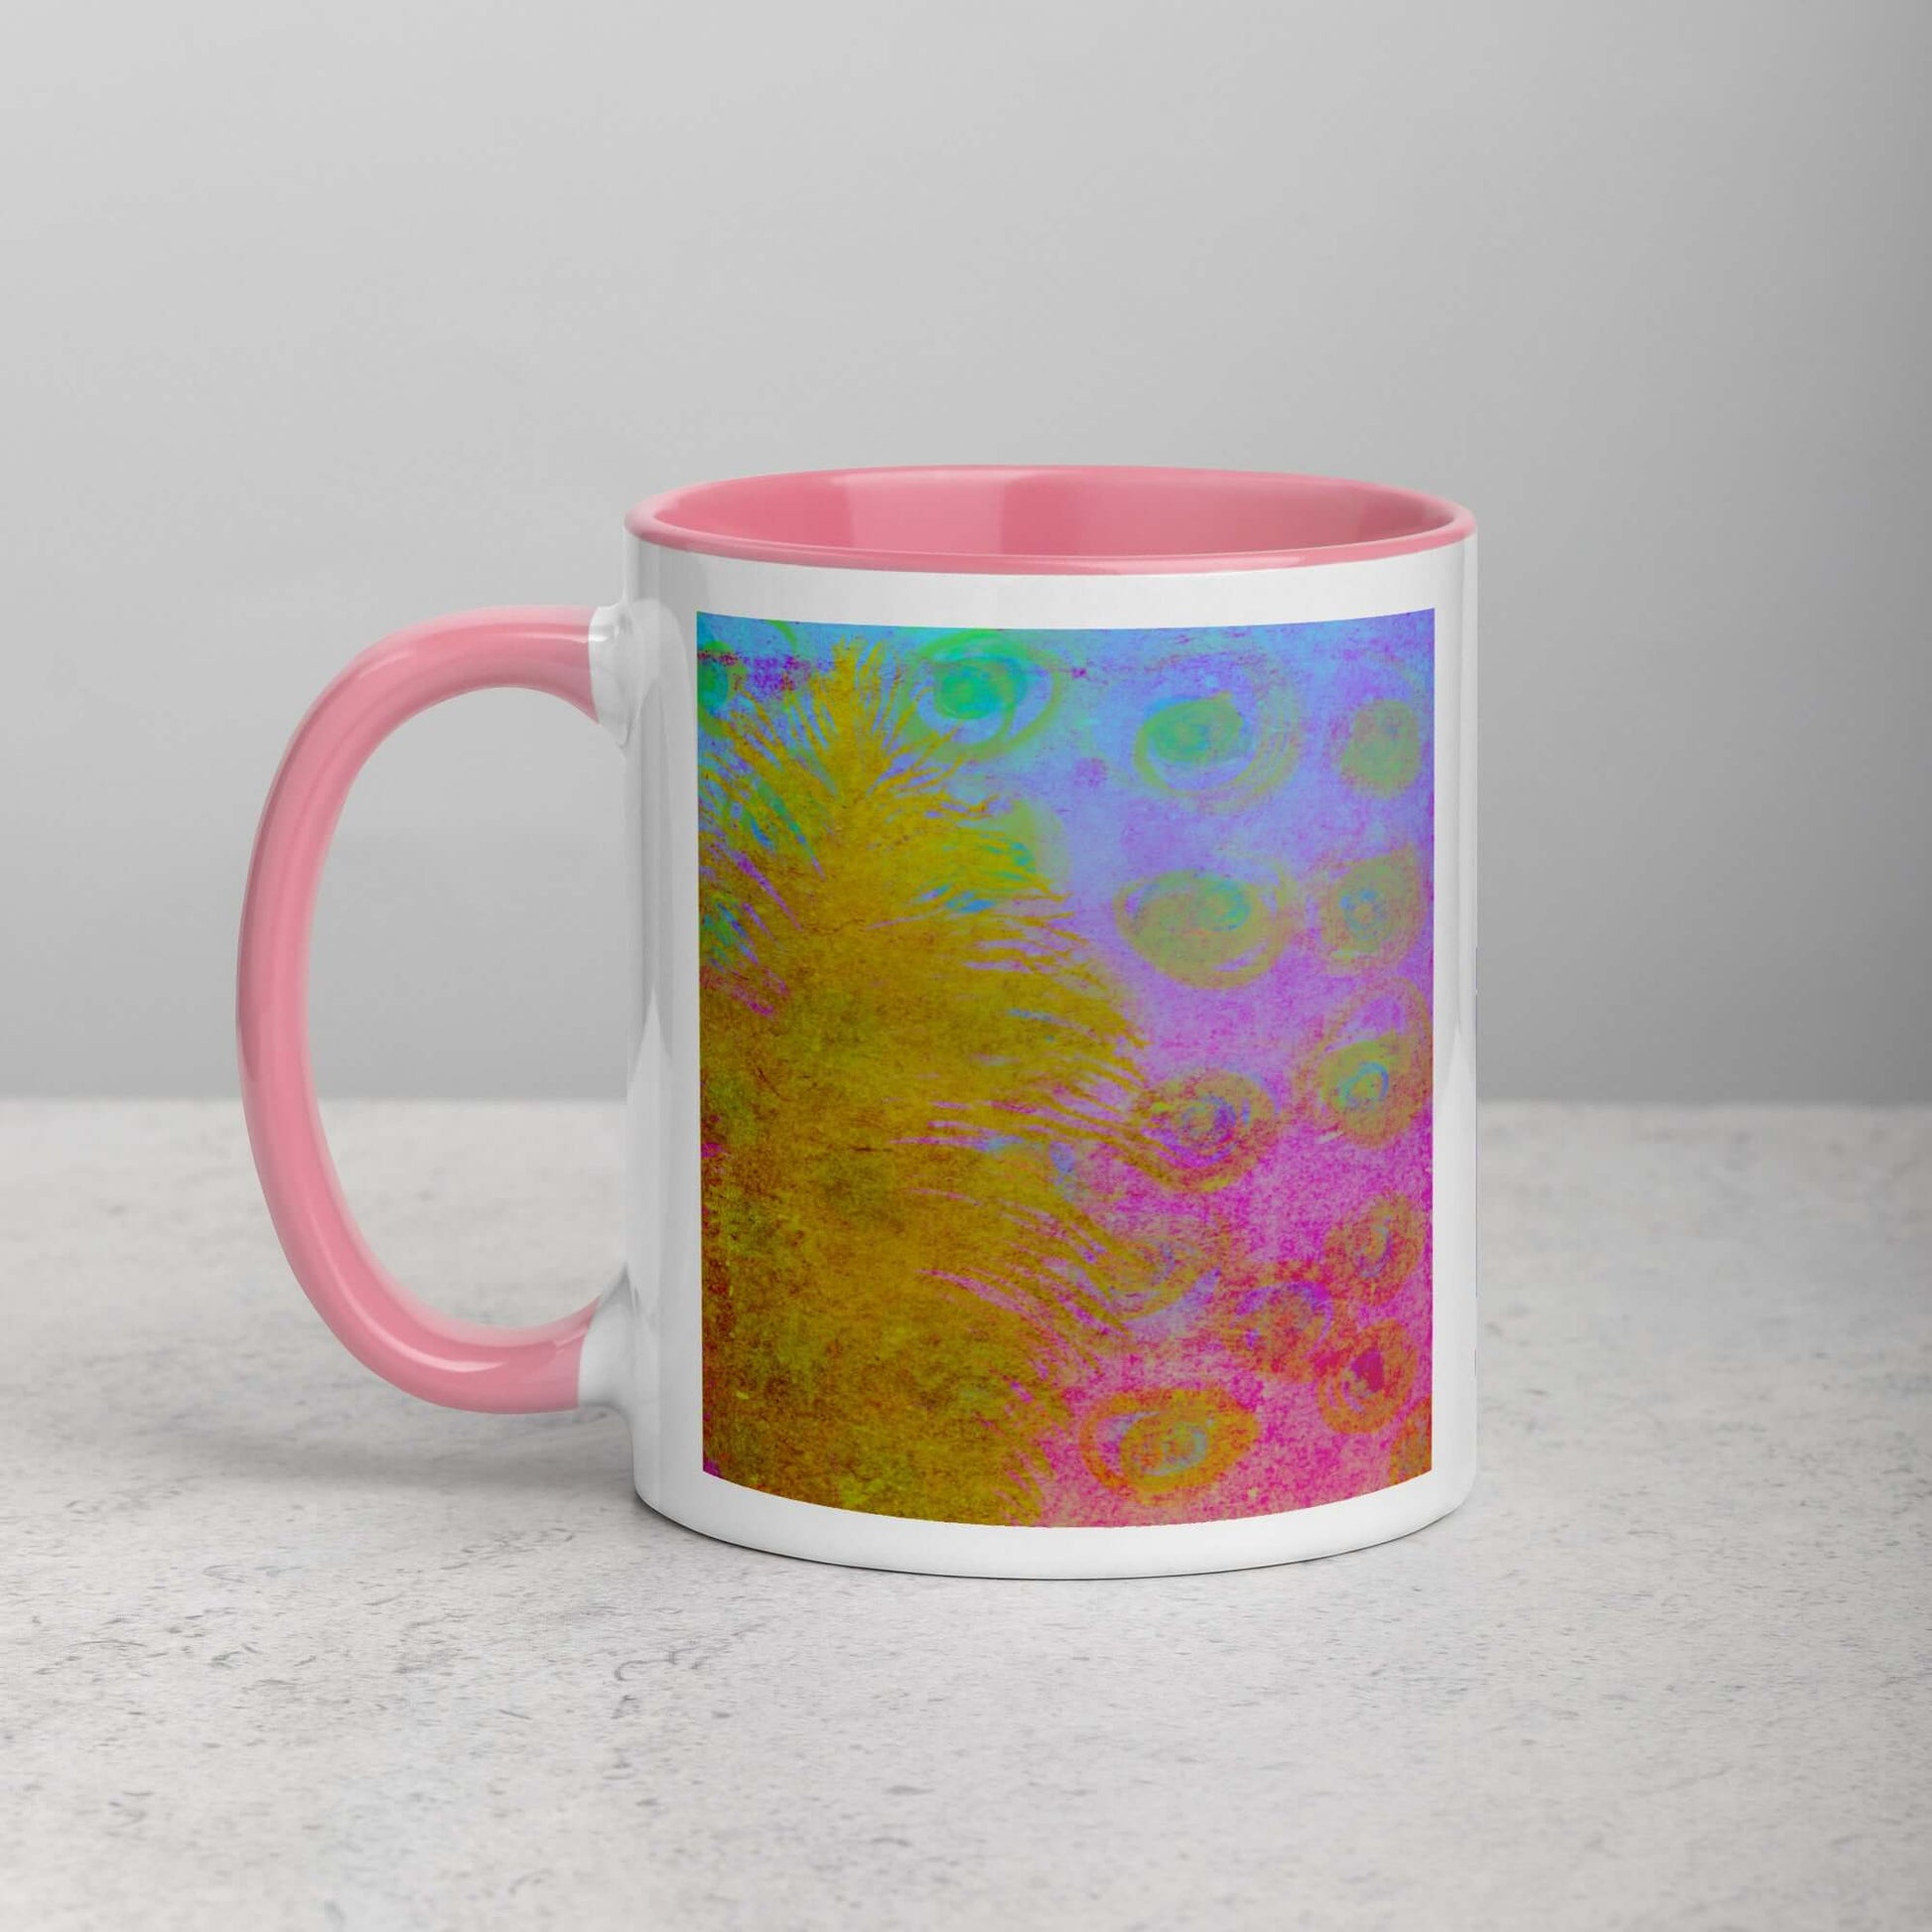 Golden Feather Pink and Blue “Fantasia” Abstract Art Mug with Light Pink Color Inside Left Handed Front View